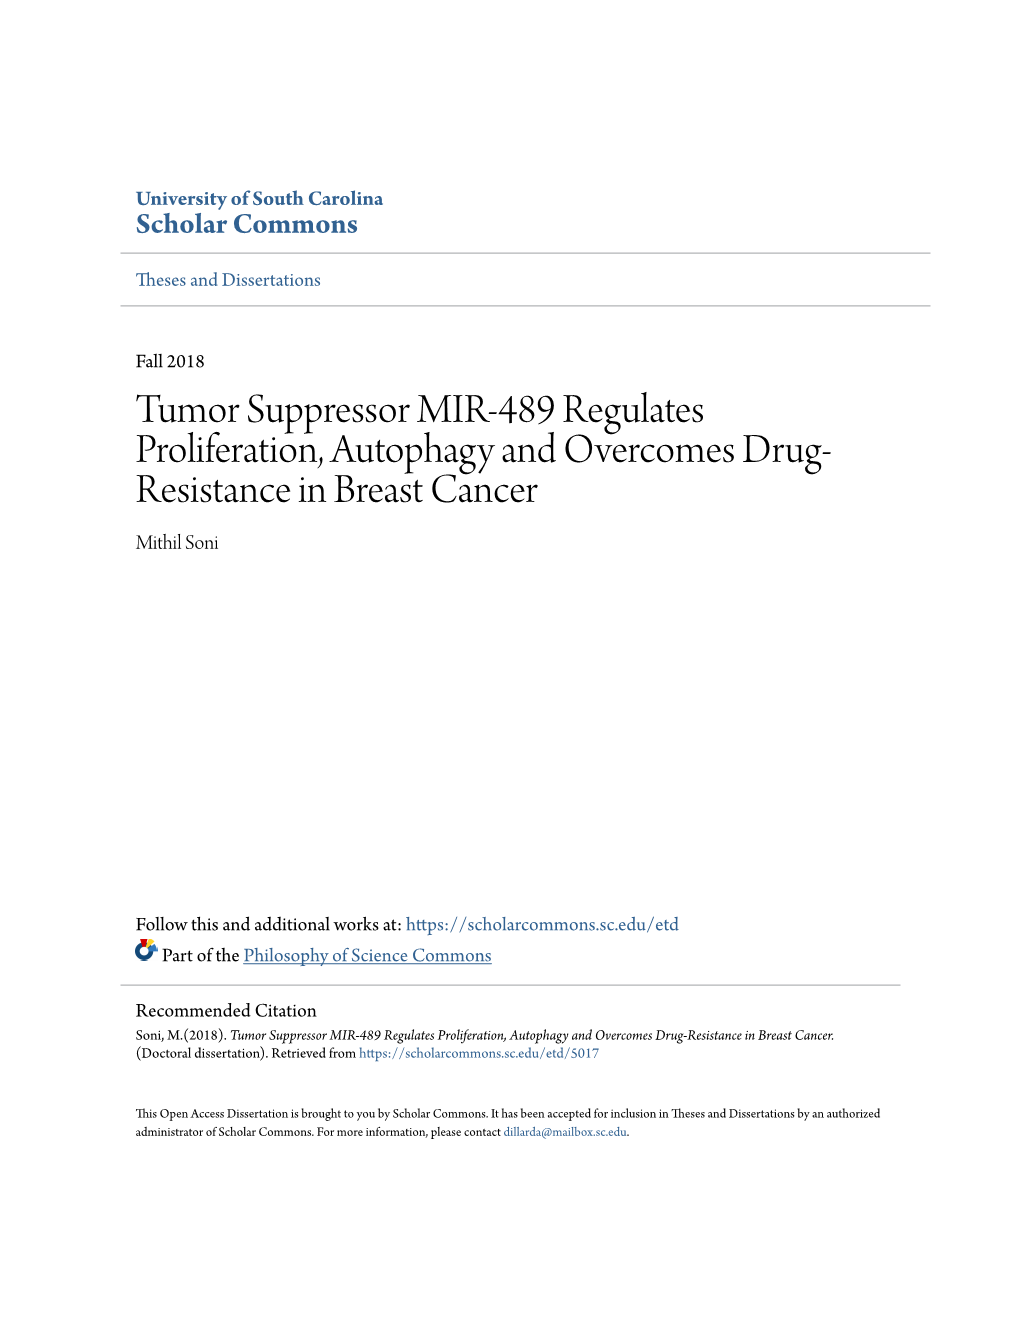 Tumor Suppressor MIR-489 Regulates Proliferation, Autophagy and Overcomes Drug- Resistance in Breast Cancer Mithil Soni